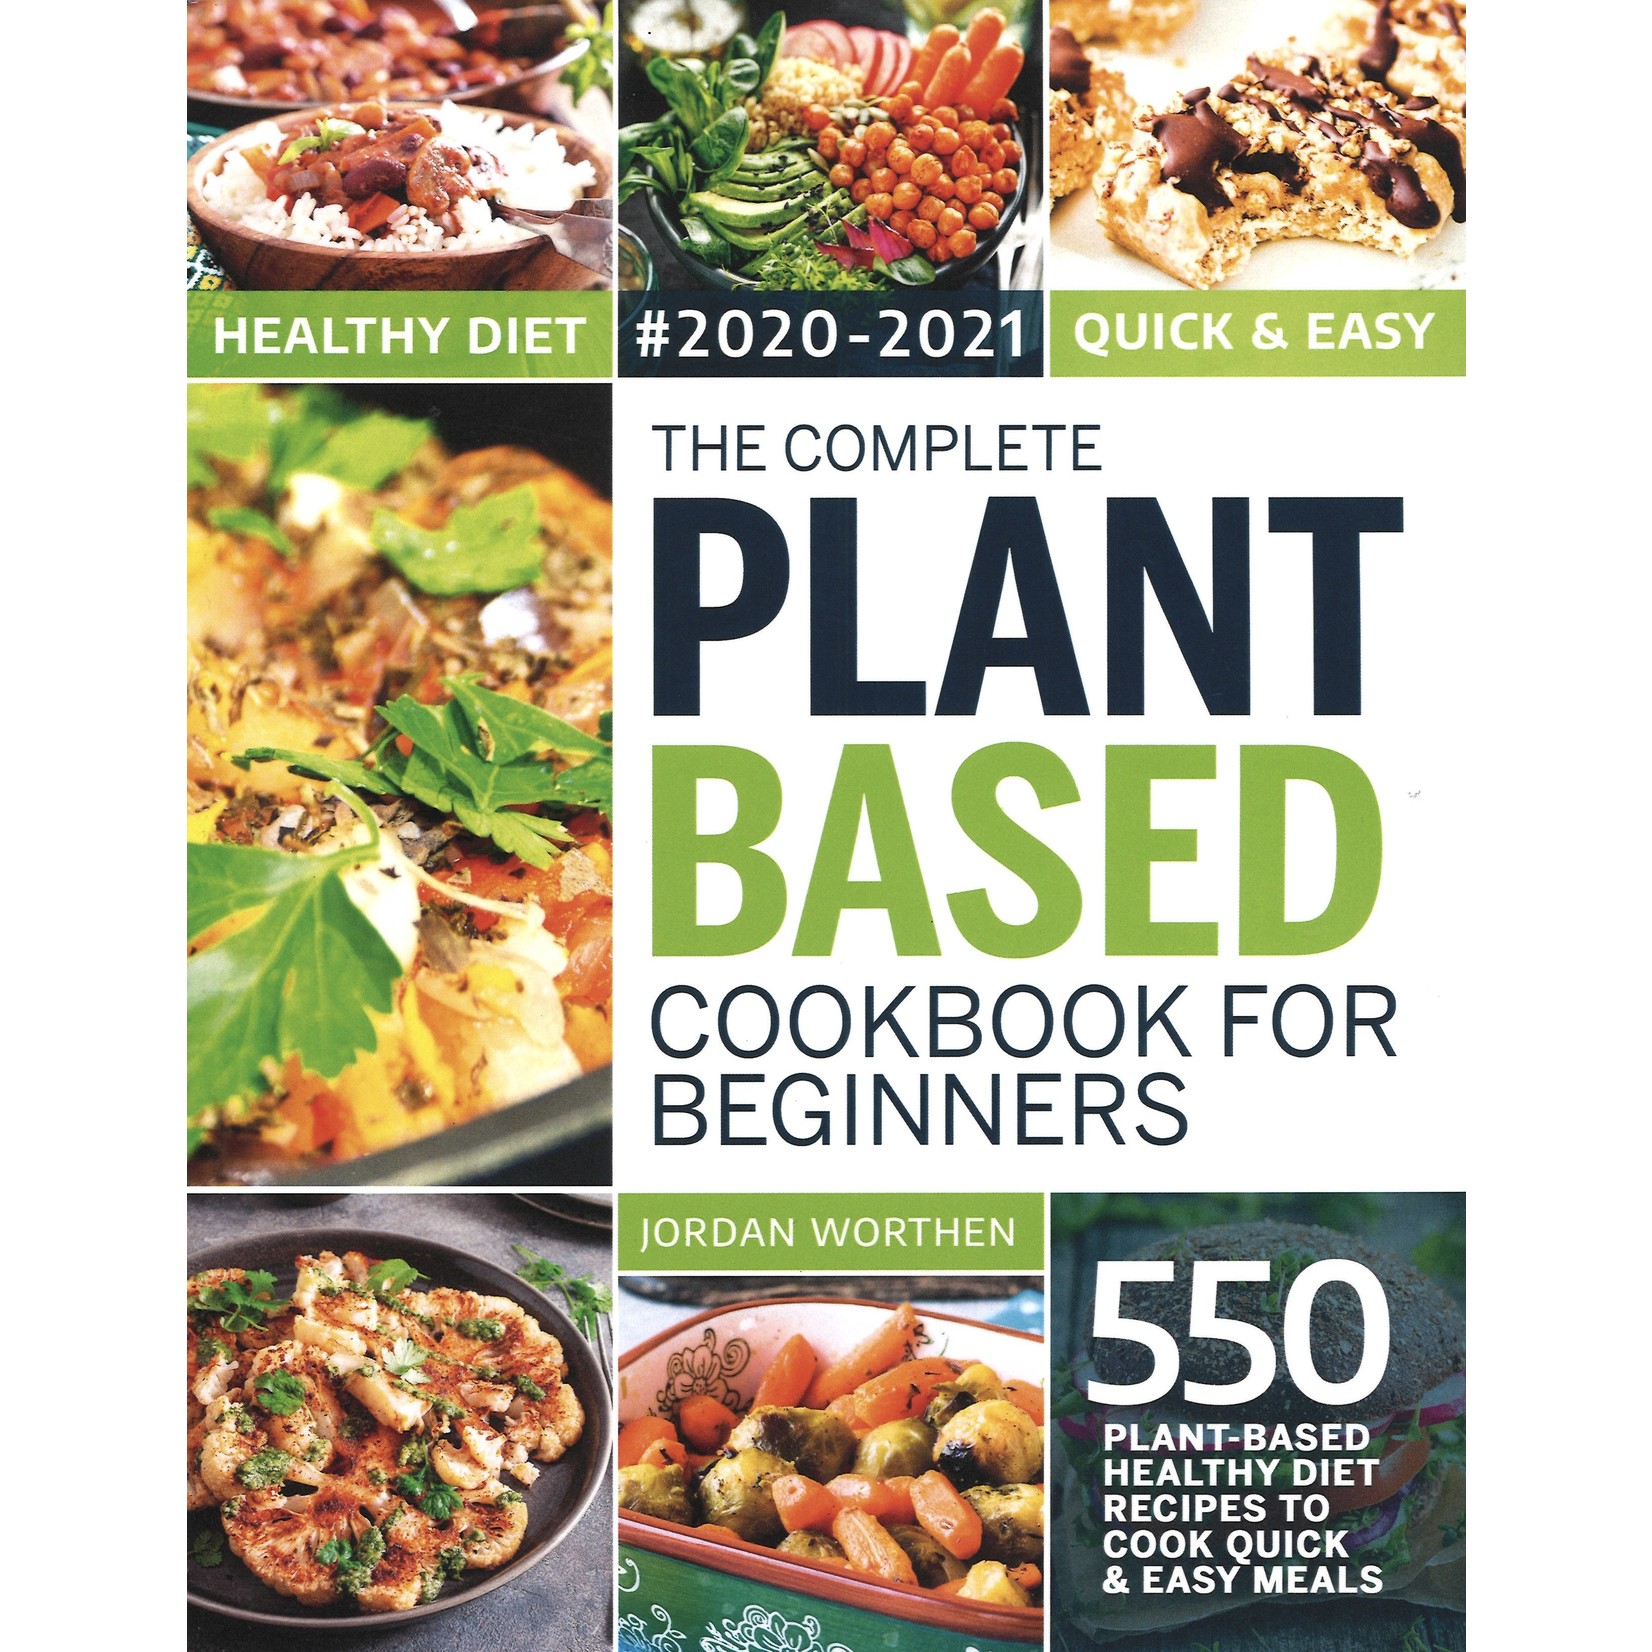 THE COMPLETE PLANT BASED COOKBOOK FOR BEGINNERS